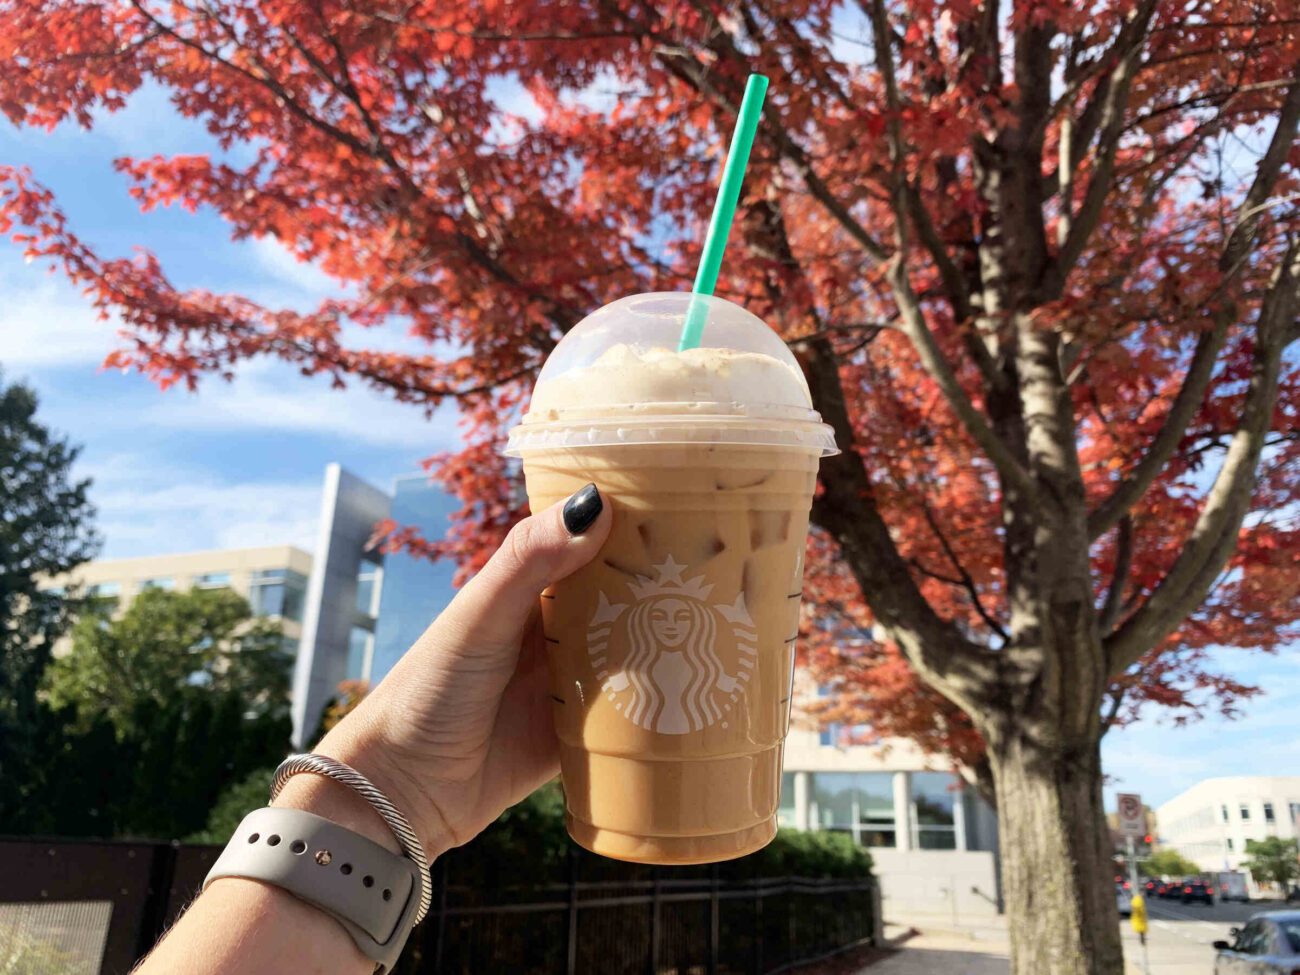 When September hits us like a ton of pumpkins, we grow tired of the standard Starbucks menu options. Here are the perfect drinks for Fall.